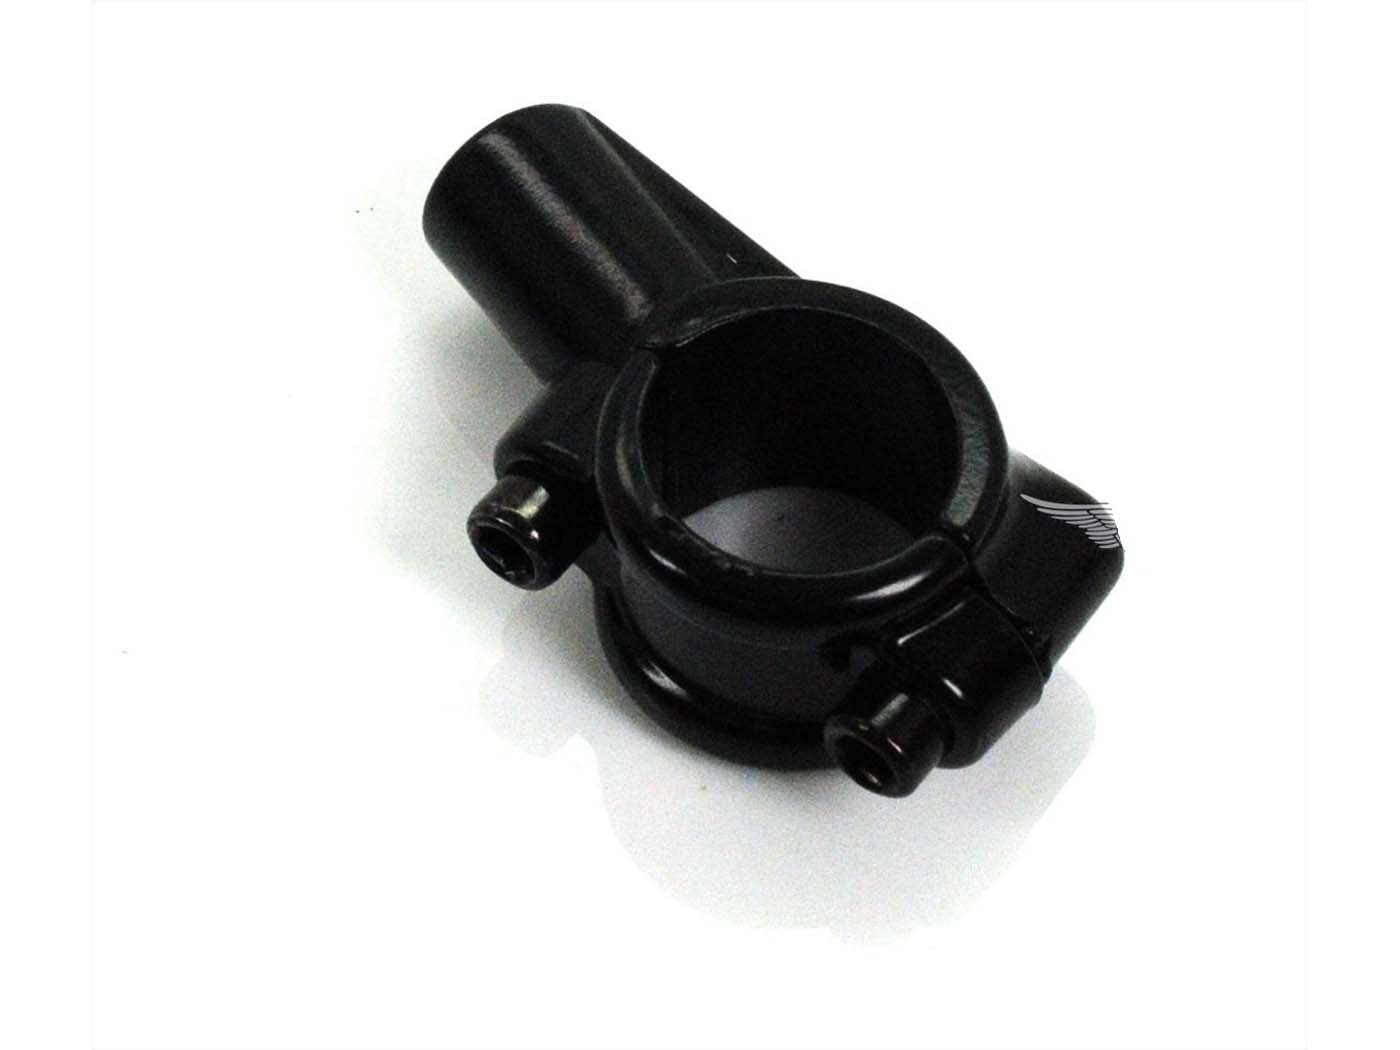 Mirror Holder M10 X 1.25 Black For Motorcycles, Scooters